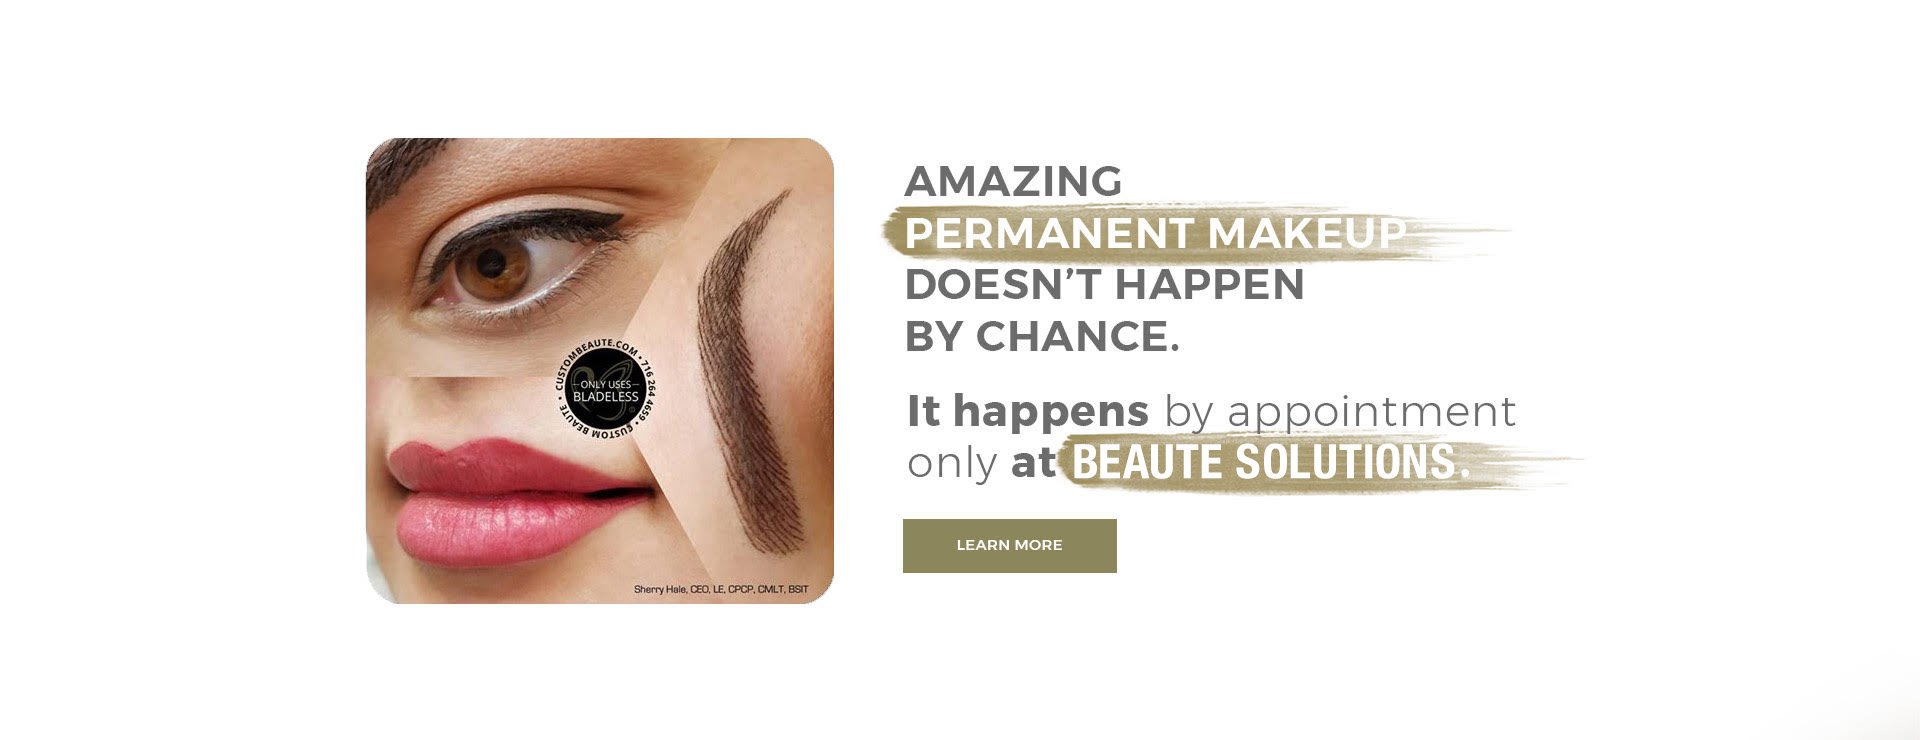 Amazing Permanent Makeup doesn't happen by chance. It happens by appointment only at Beaute Solutions. Learn more.